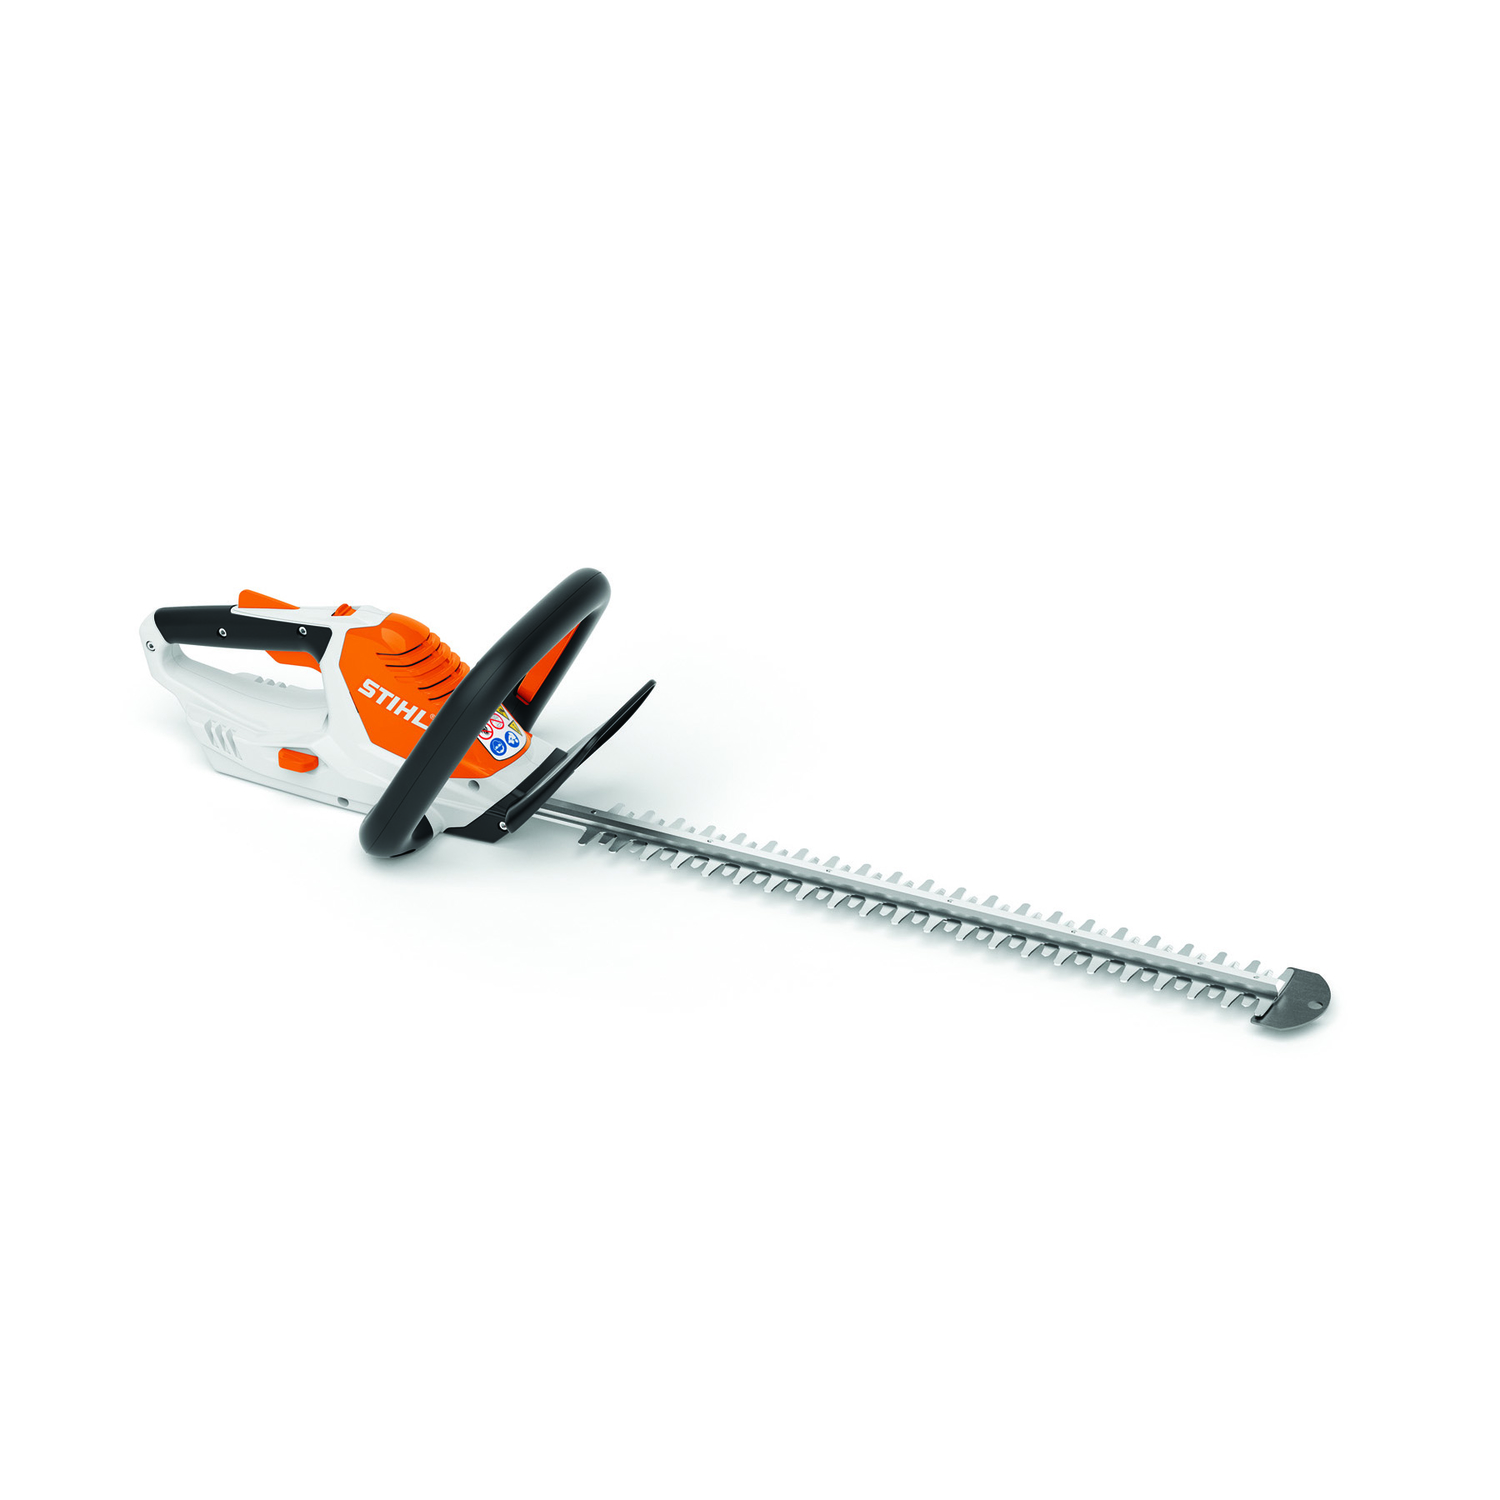 buy cordless hedge trimmer